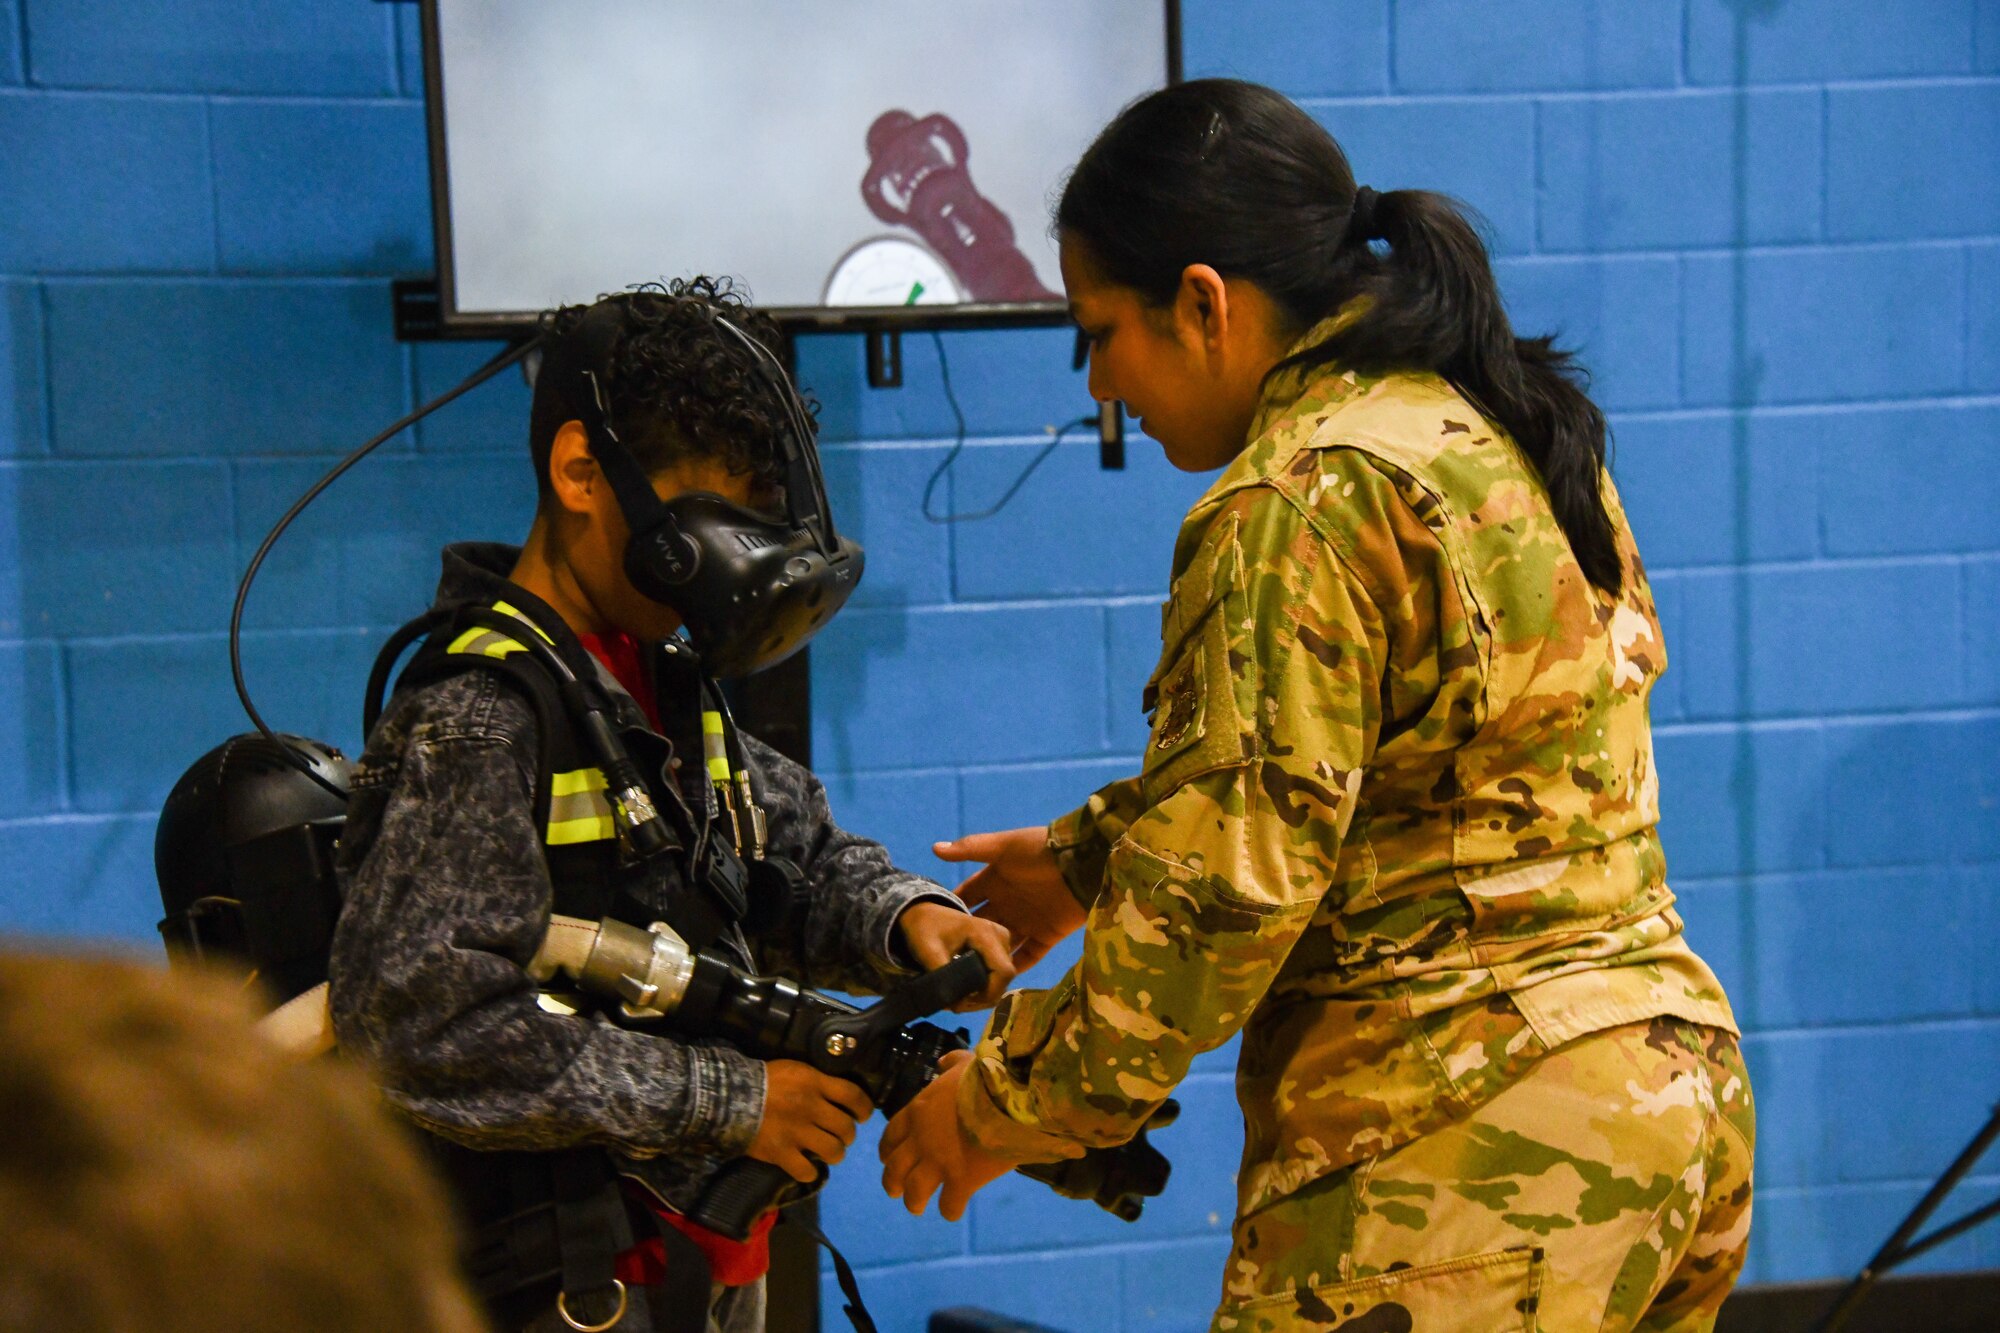 Airman 1st Class Gabriella Lopez, 97th Civil Engineer Squadron firefighter, helps an Altus Junior High School Student operate the FLAIM trainer at Altus High School, Altus, Oklahoma, March 30, 2022. The FLAIM Trainer simulates fires and other hazardous scenarios virtually to help firemen prepare for real-life events. (U.S. Air Force photo by Airman 1st Class Miyah Gray)